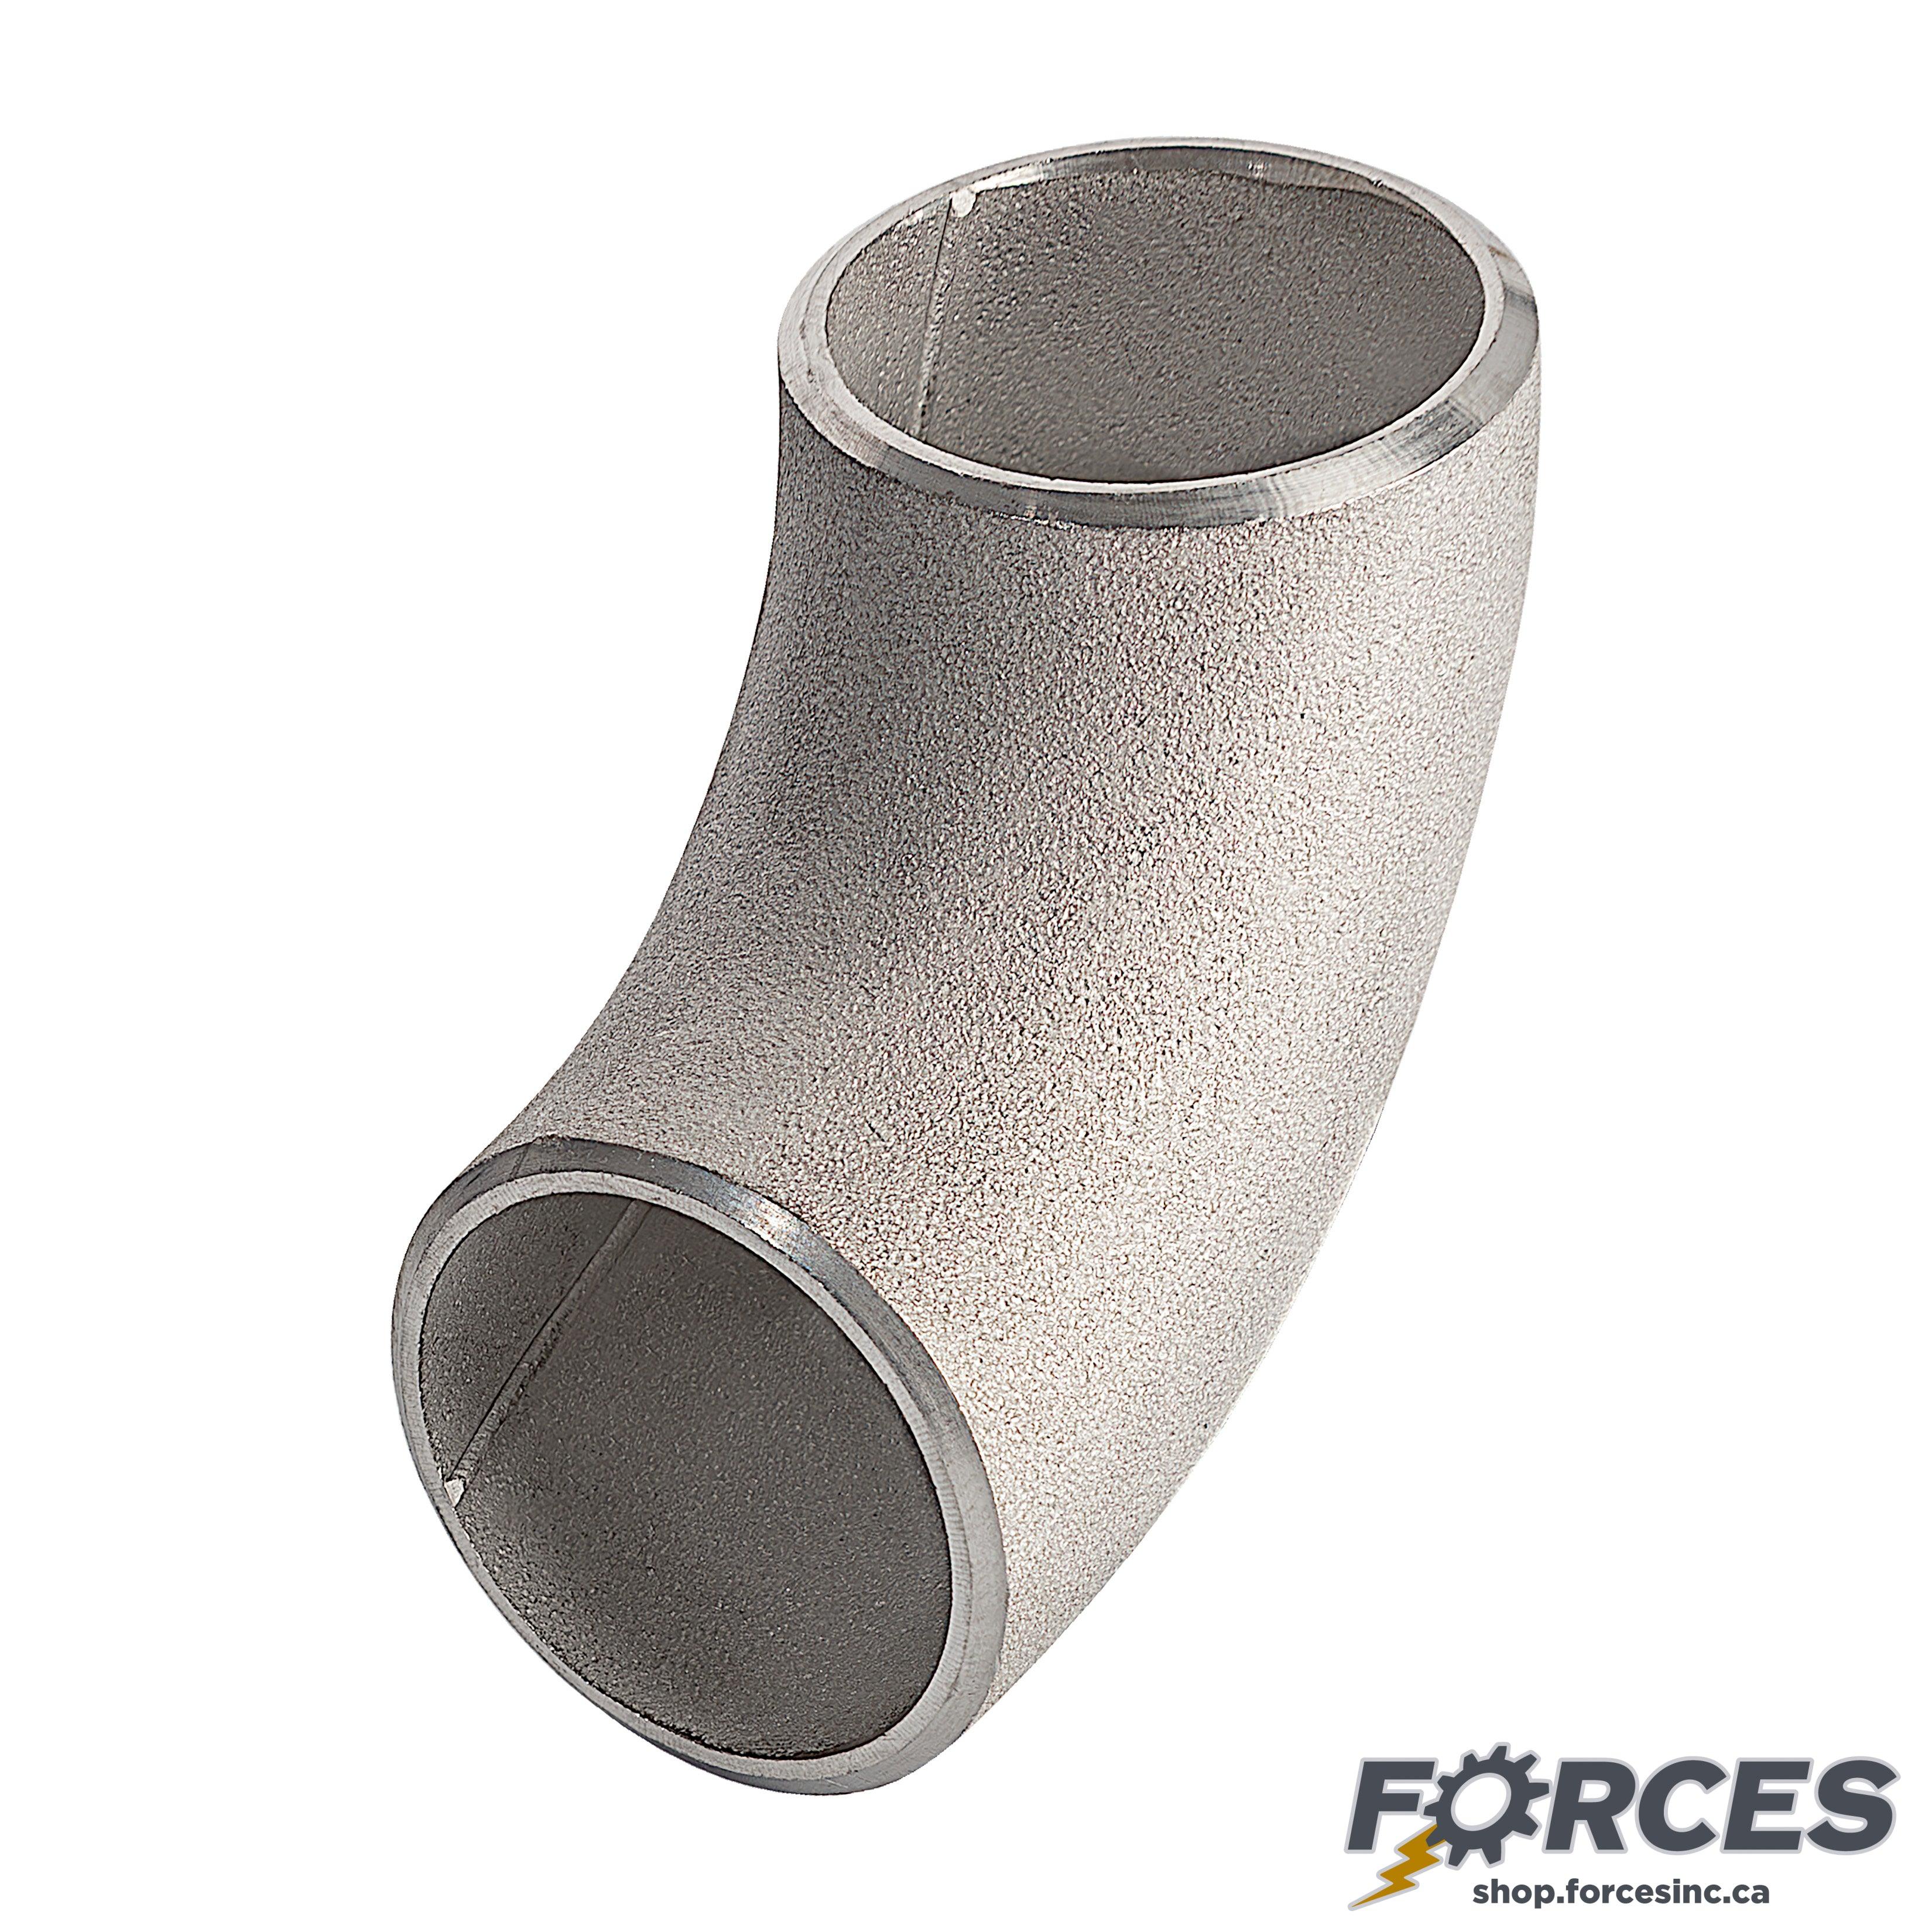 2-1/2" Elbow 90° SCH 10 Butt Weld - Stainless Steel 304 - Forces Inc